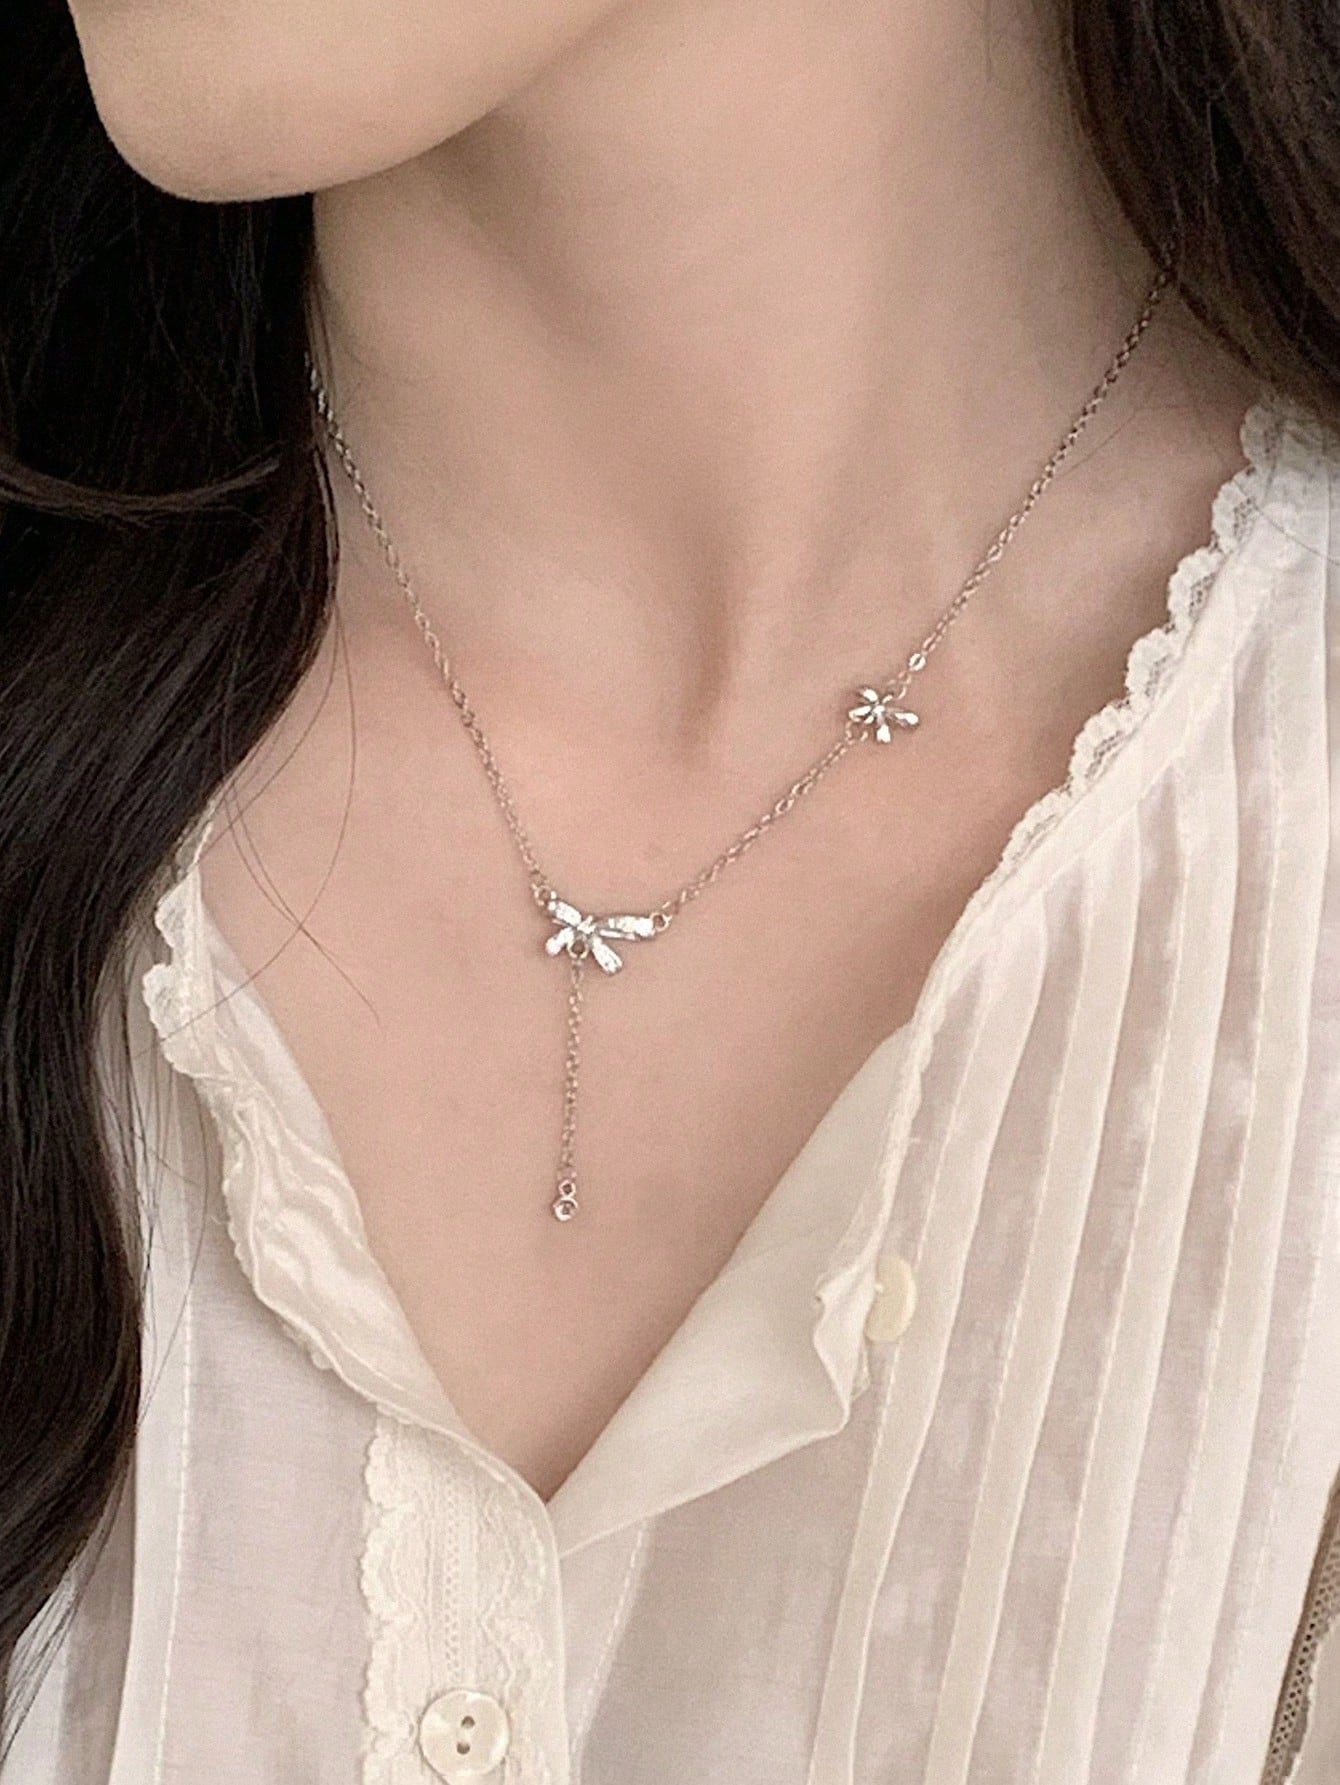 Fashionable And Luxurious Water-Drop Rhinestone Bow Detail Pendant Necklace That Matches All Outfits